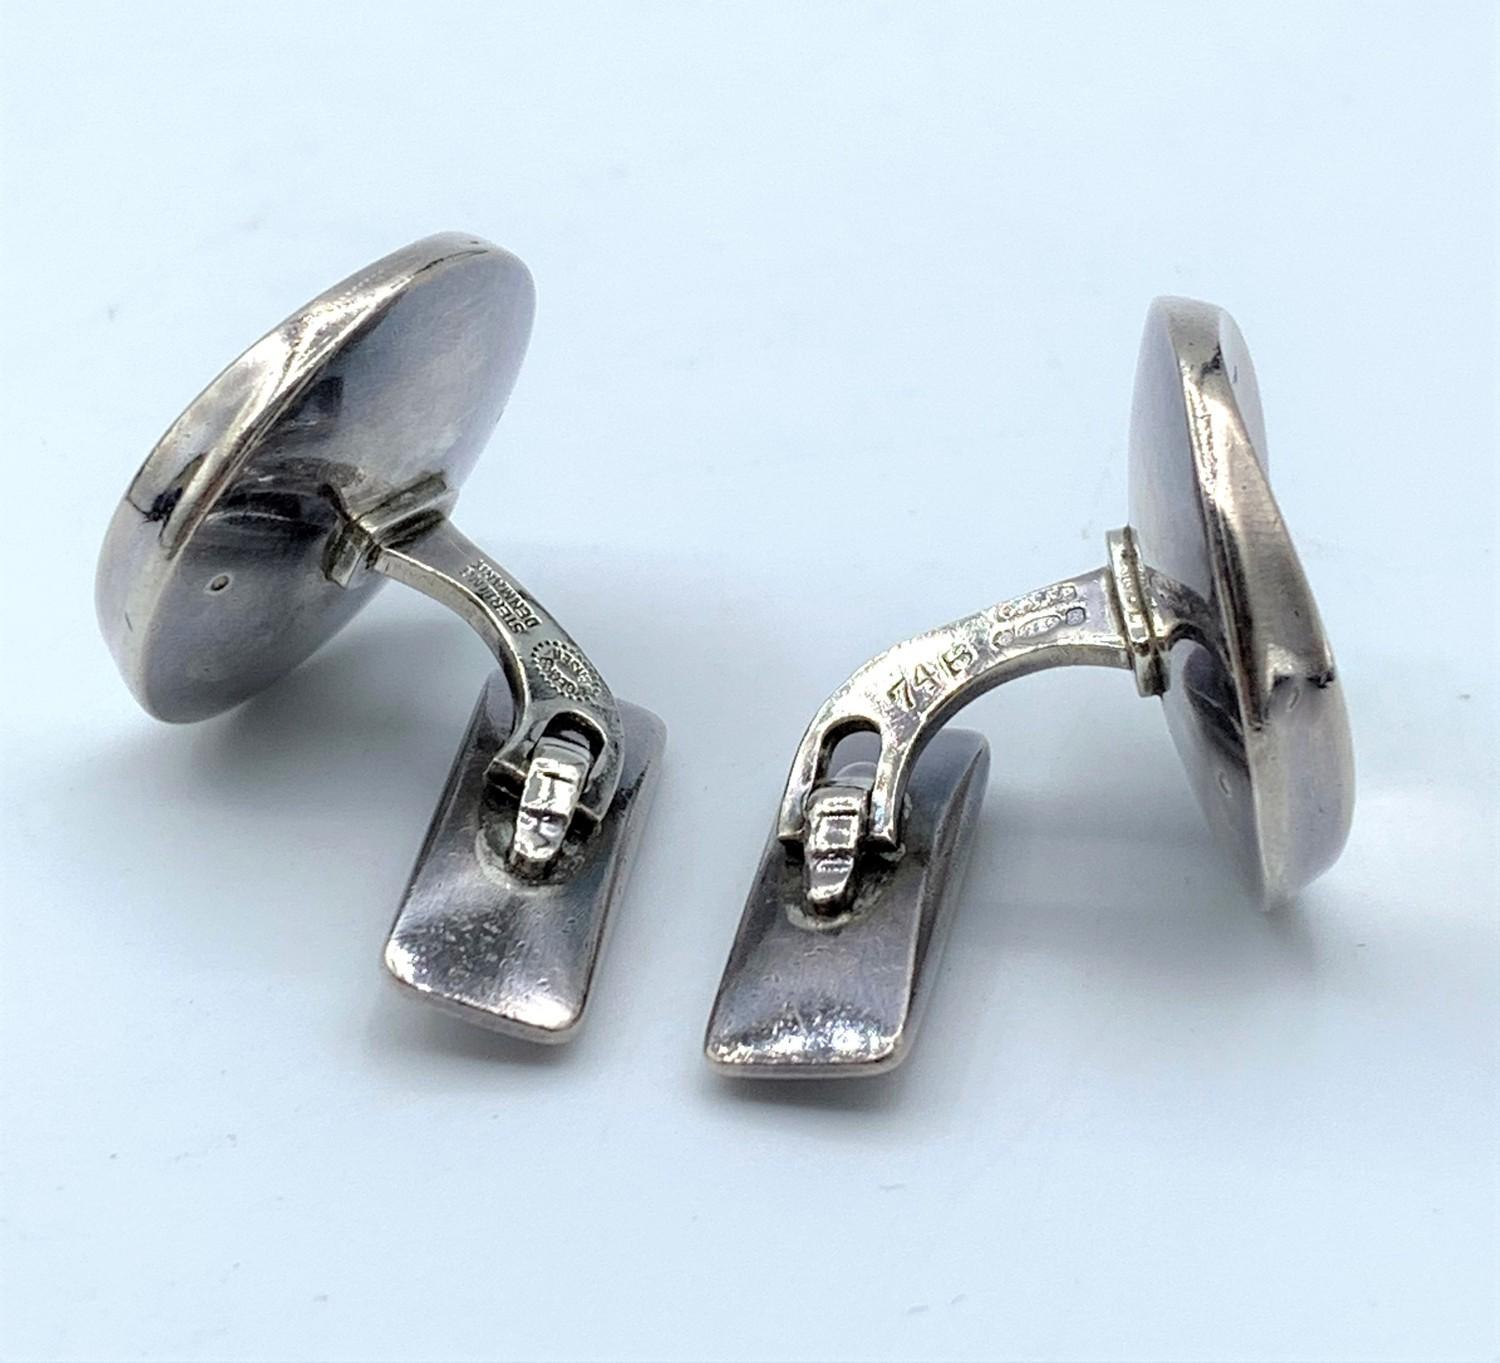 Pair of Georg Jensen Silver Cufflinks in original Box, weight 21.7g and size 25x30mm approx - Image 3 of 3